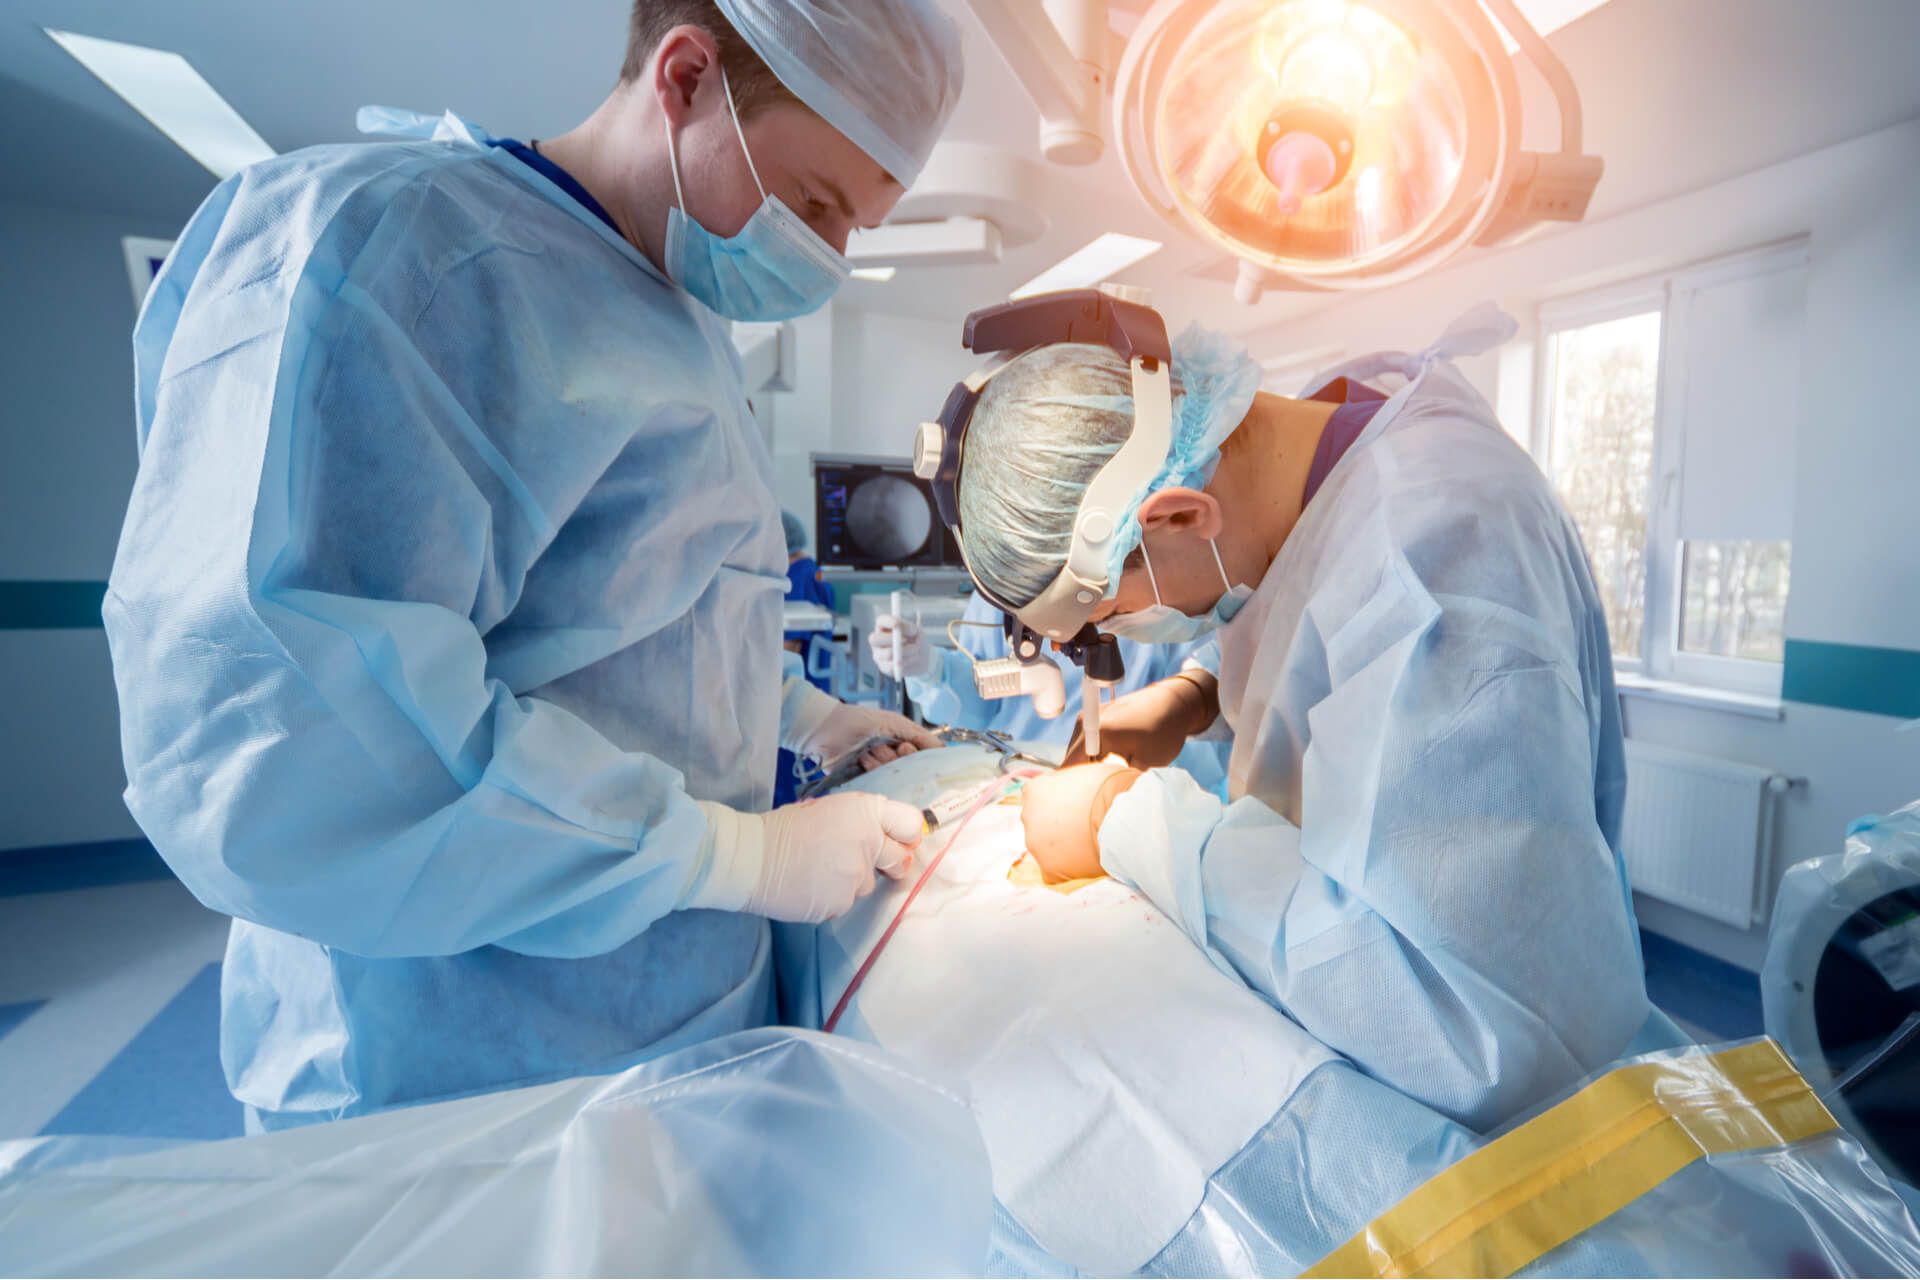 Group of surgeons in operating room with surgery equipment